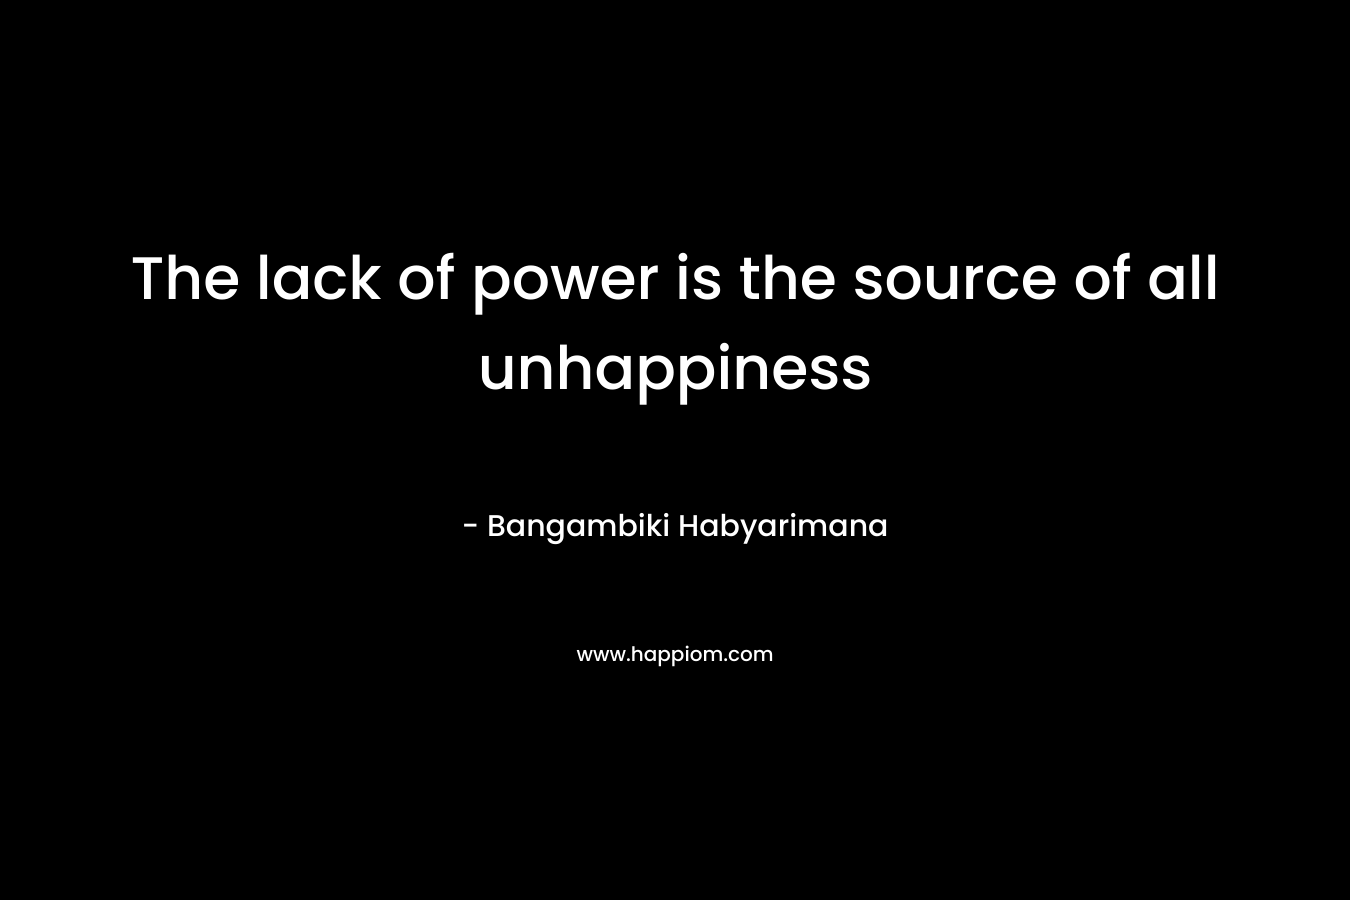 The lack of power is the source of all unhappiness